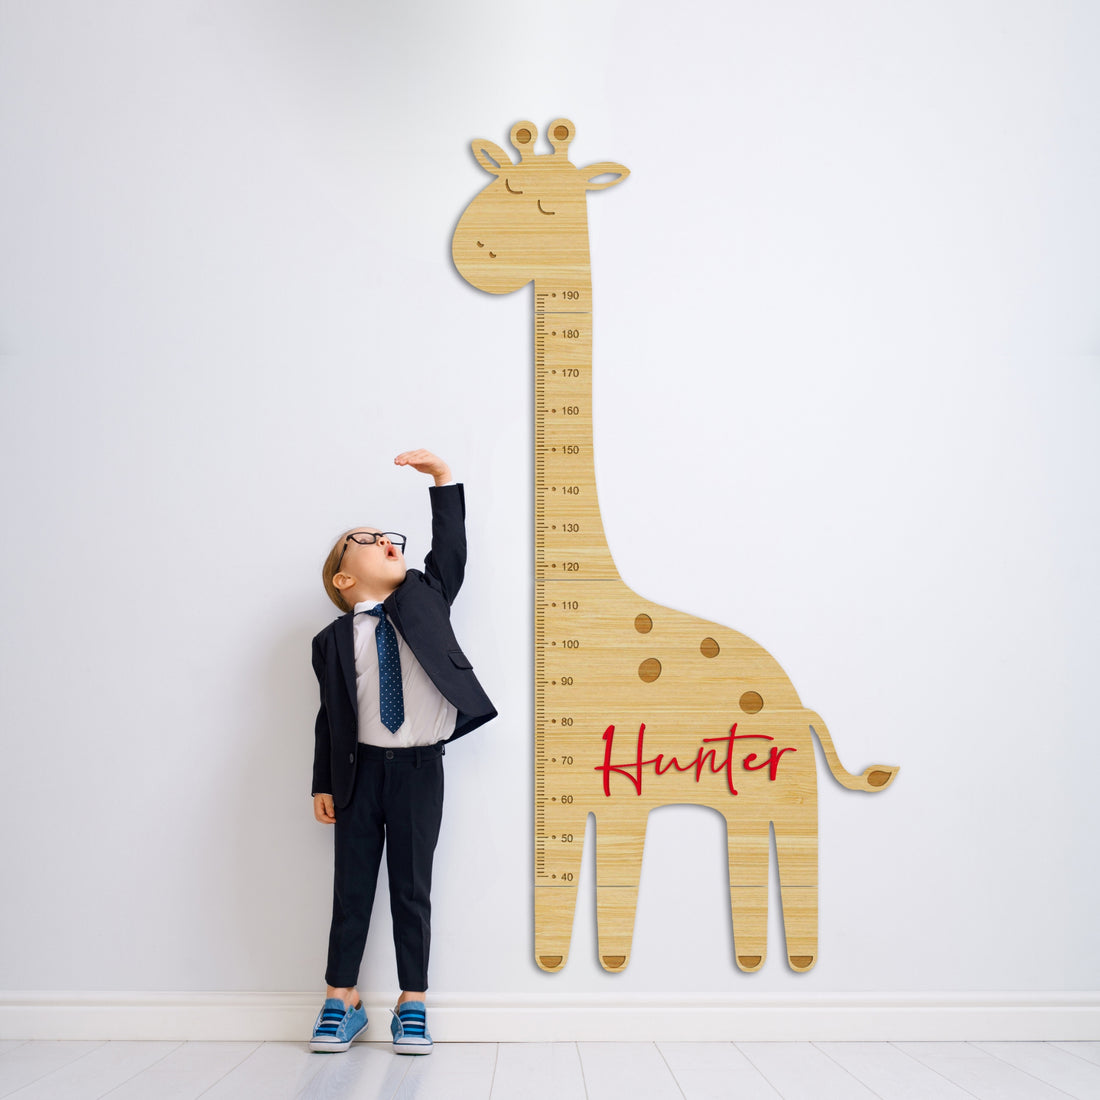 Custom 3D Raised Name Wooden Giraffe Height Chart, Personalised Laser Cut & Engraved Family Growth Metric Ruler Record, Nursery Wall Decor